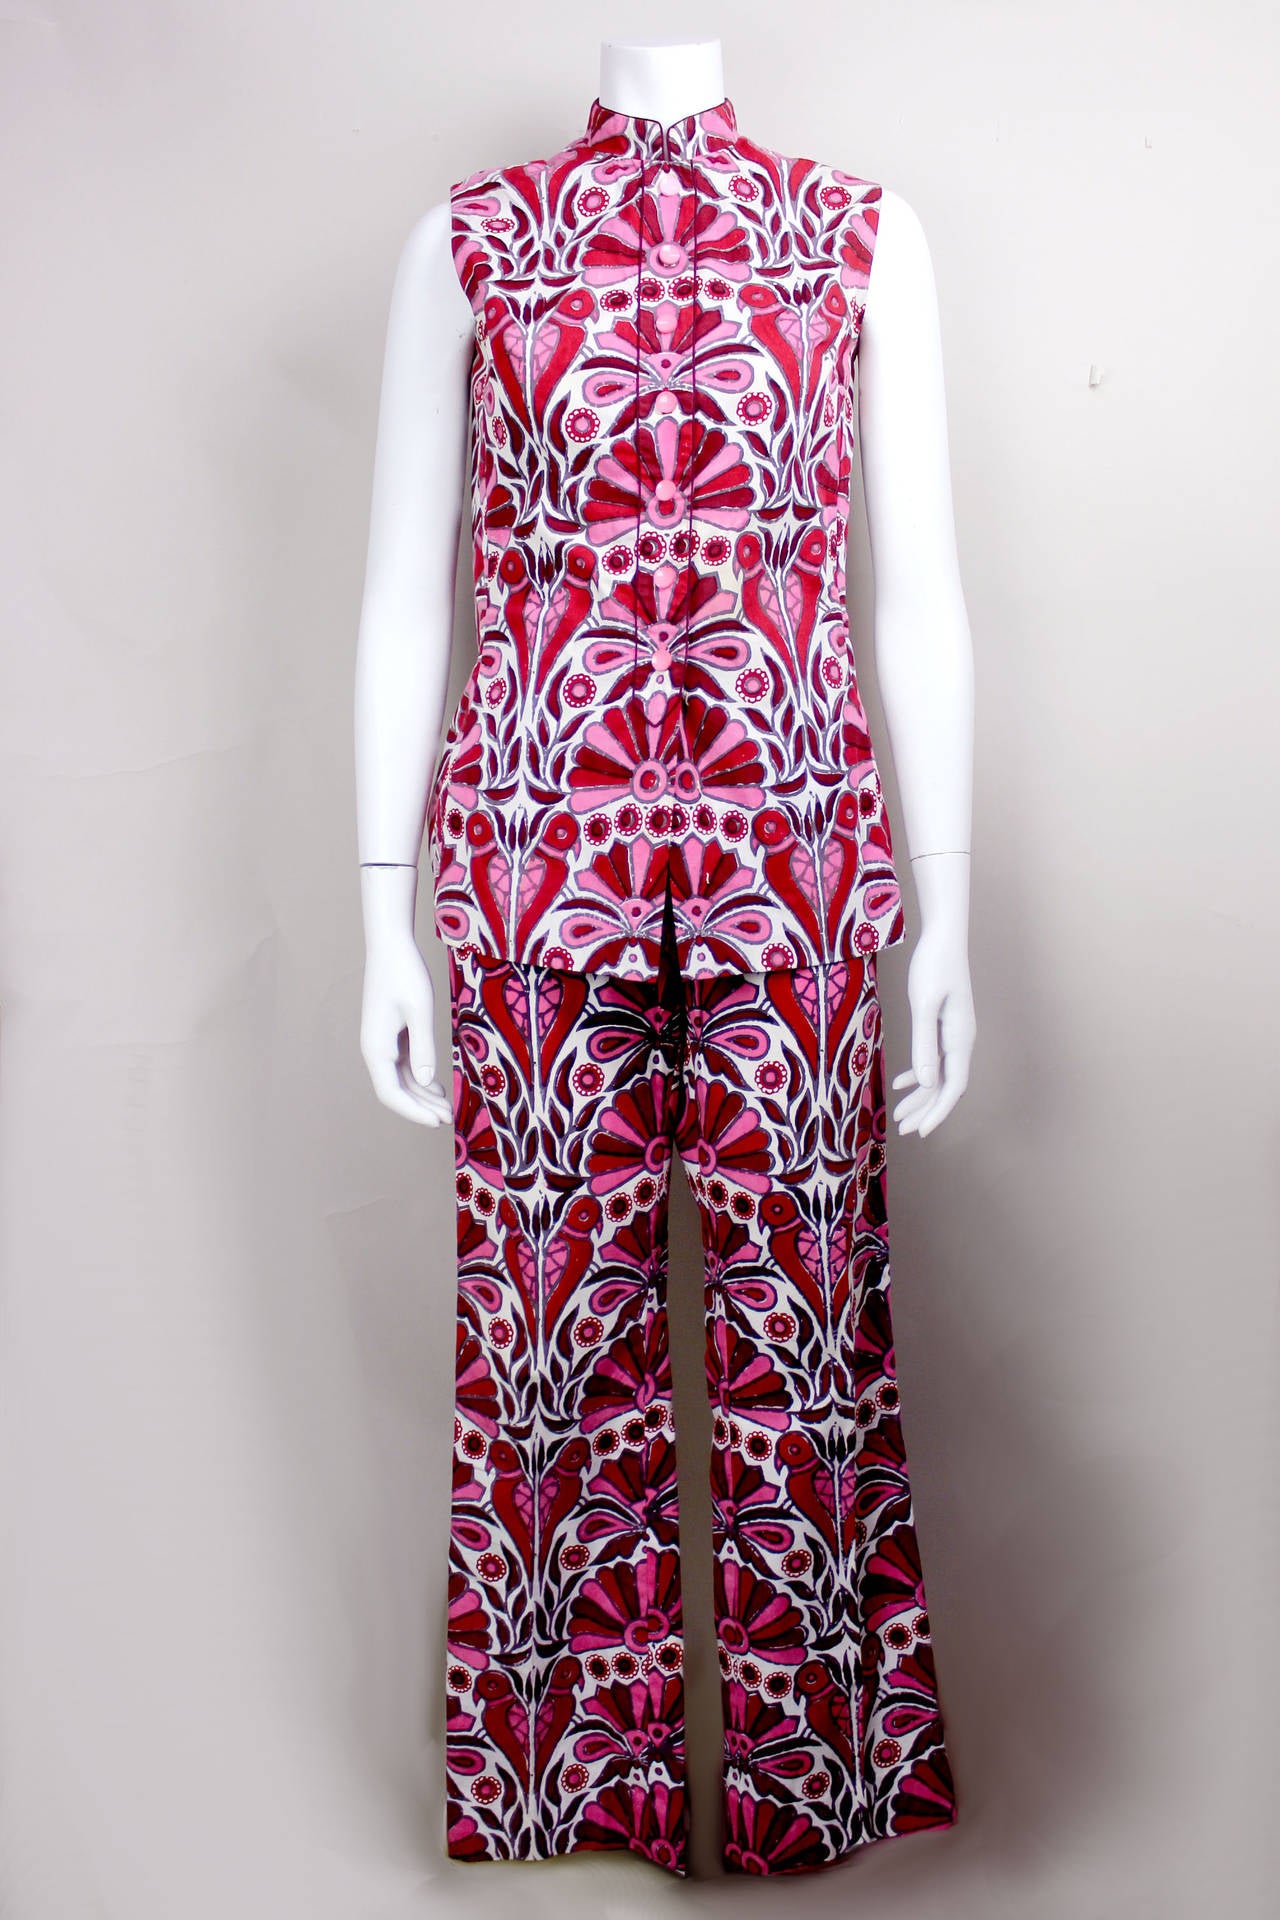 This two-piece ensemble was made in the Bahamas in the early 1970s, when a visitor to the Caribbean could have a custom garment designed and sewn in 48 hours. It features a tropical batik print in a vibrant pink and wine on a white background. The